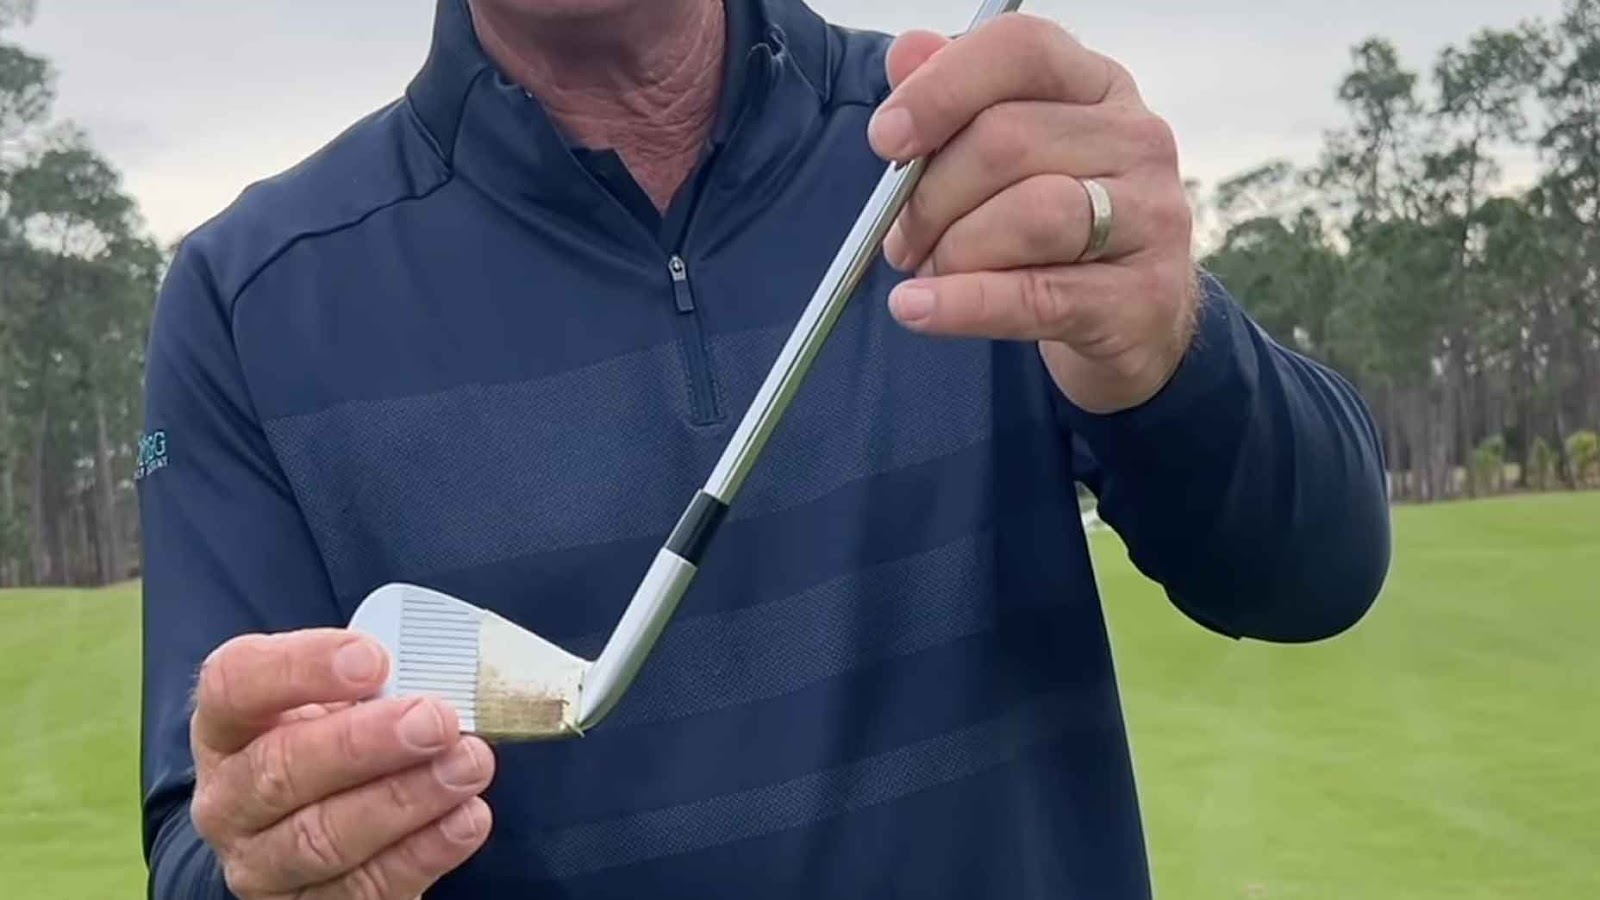 Mishits off either the heel or toe can be frustrating. But GOLF Top 100 Teacher Brian Mogg shares an easy trick to help correct the issue